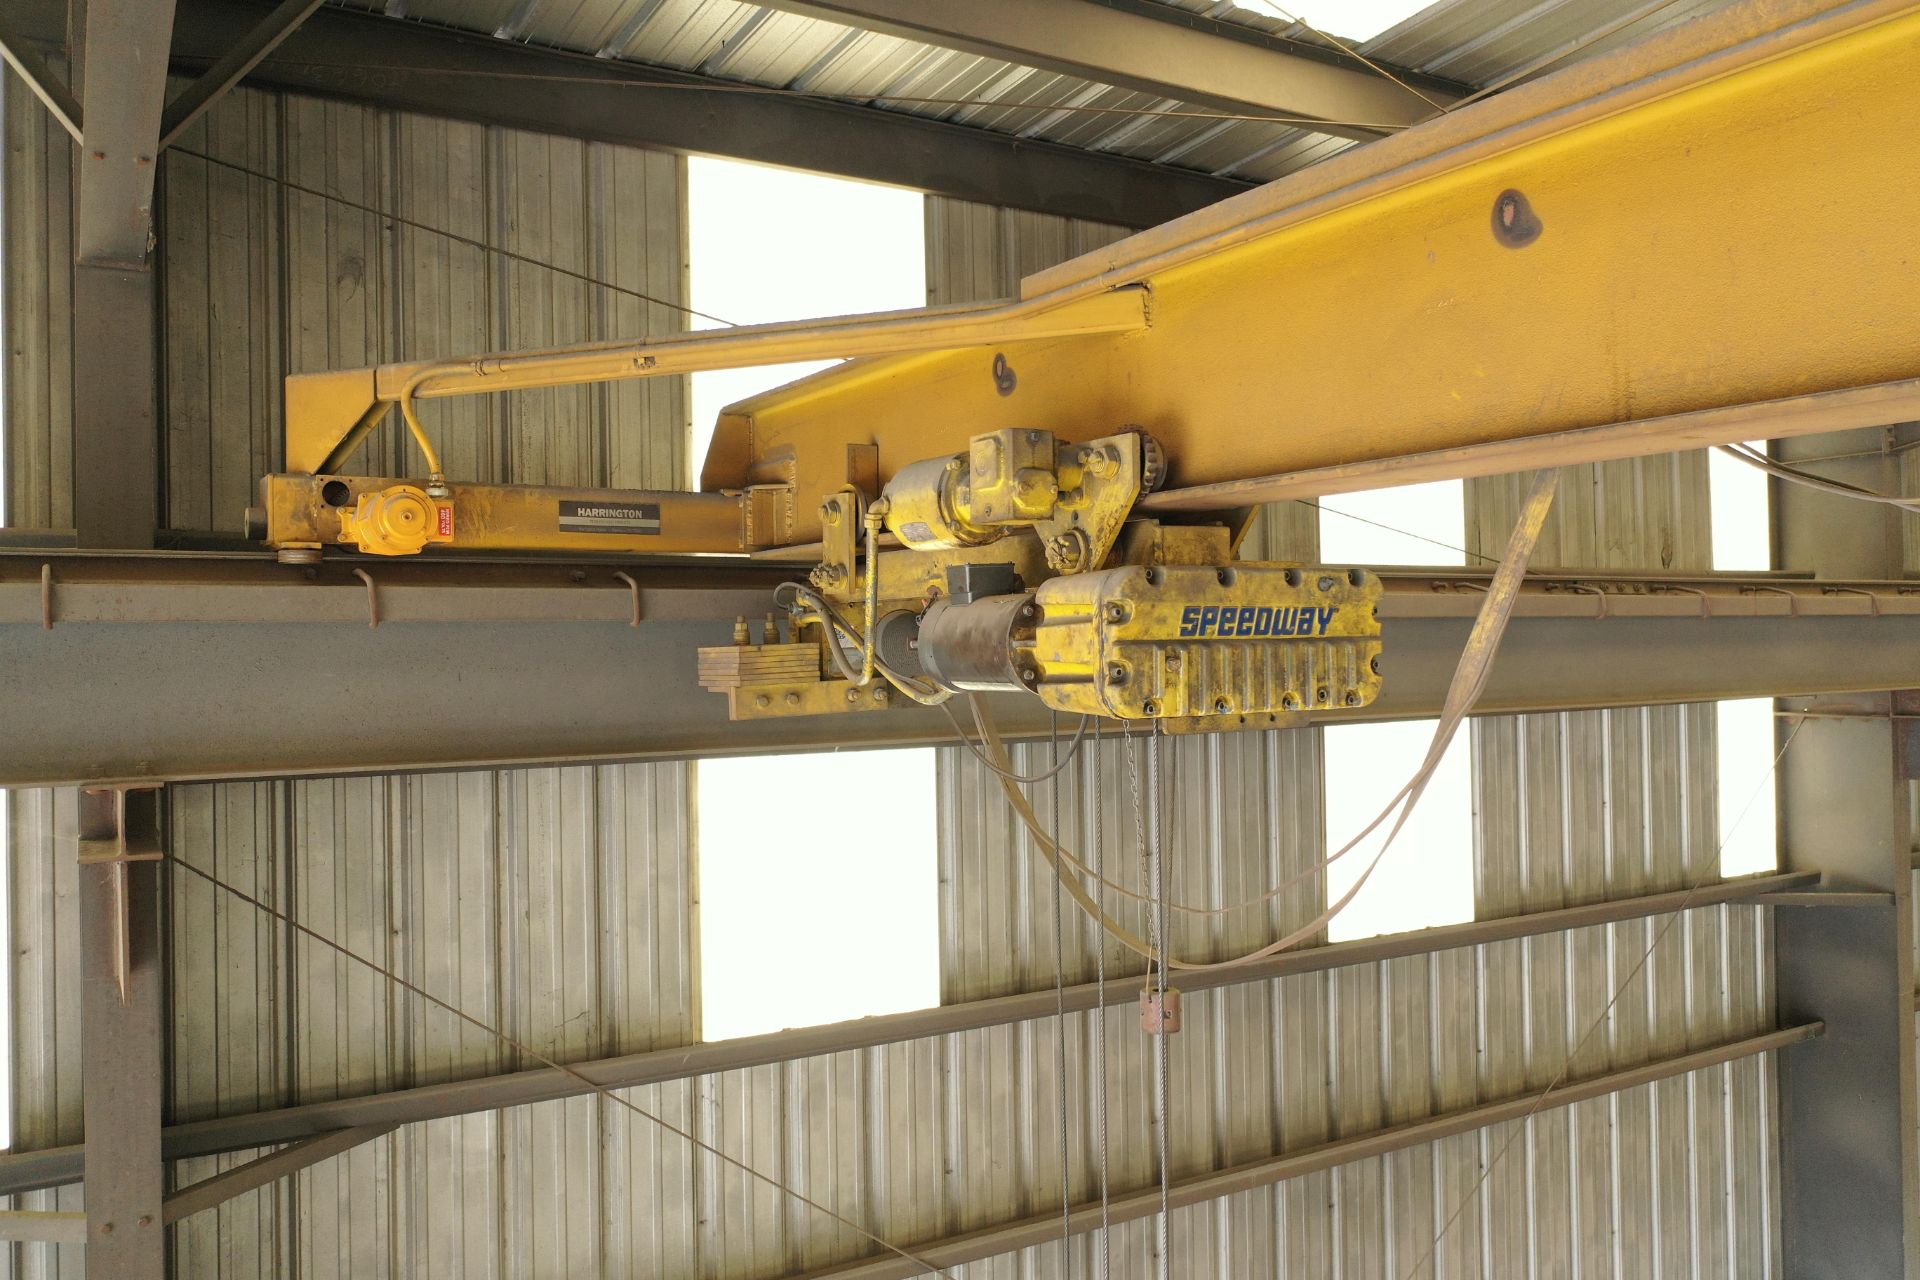 Evans 3 Ton Overhead Crane SN: 2479B with 3 Ton Hoist & Pendant Control, Approx 40 ft Span (LOCATION - Image 4 of 7